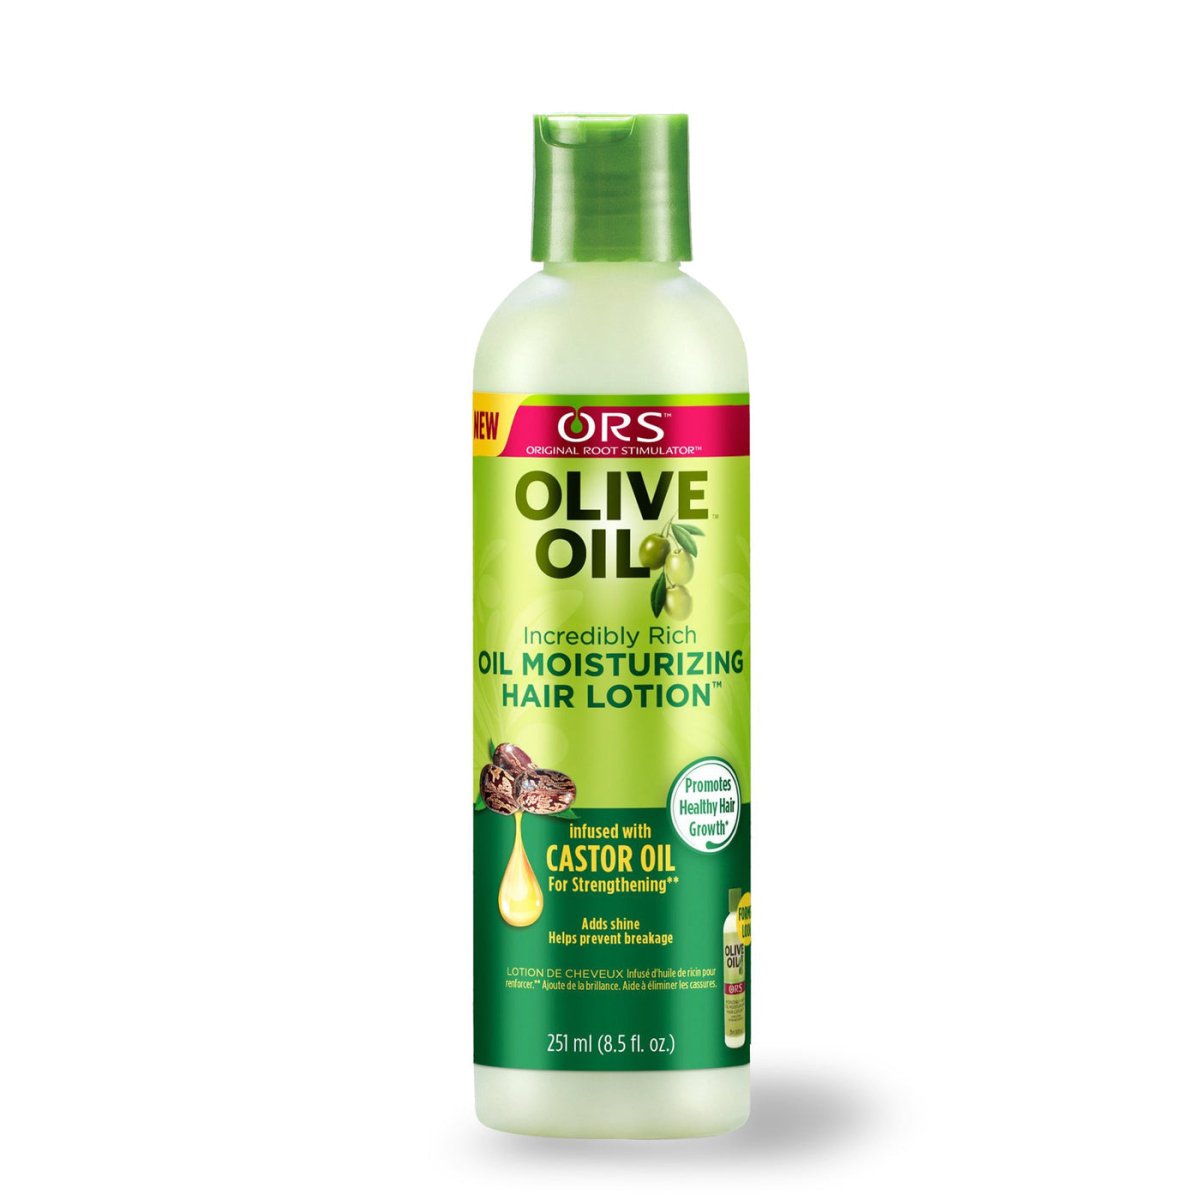 ORS Olive Oil Incredibly Rich Oil Moisturizing Hair Lotion 8.5oz - Southwestsix Cosmetics ORS Olive Oil Incredibly Rich Oil Moisturizing Hair Lotion 8.5oz Hair Moisturiser ORS Southwestsix Cosmetics 632169110797 ORS Olive Oil Incredibly Rich Oil Moisturizing Hair Lotion 8.5oz